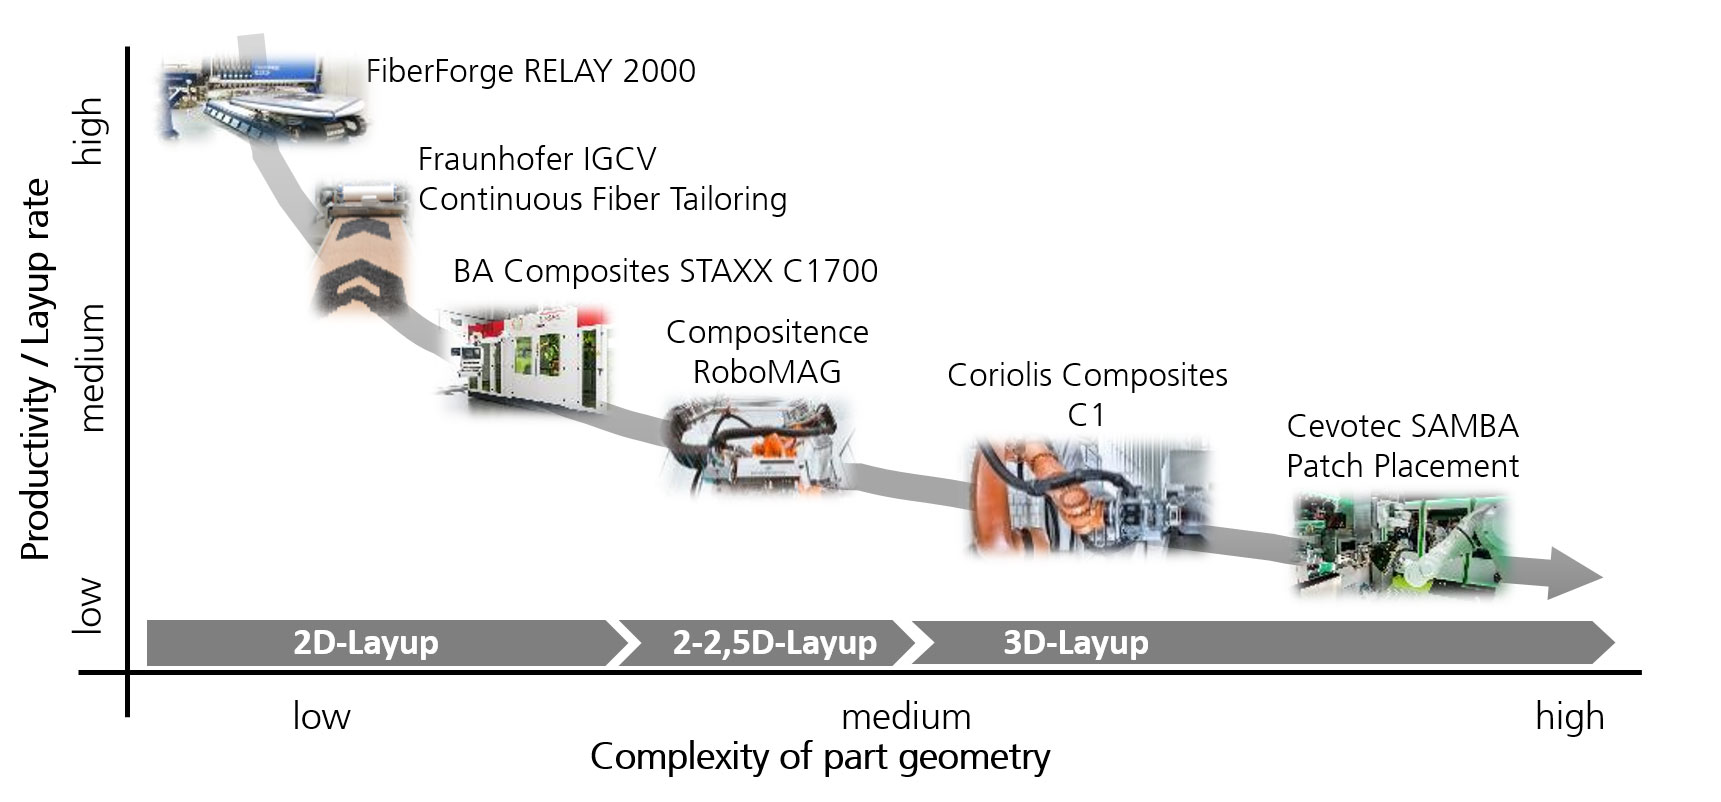 Pareto view of competing manufacturing processes for composite components at Fraunhofer IGCV.